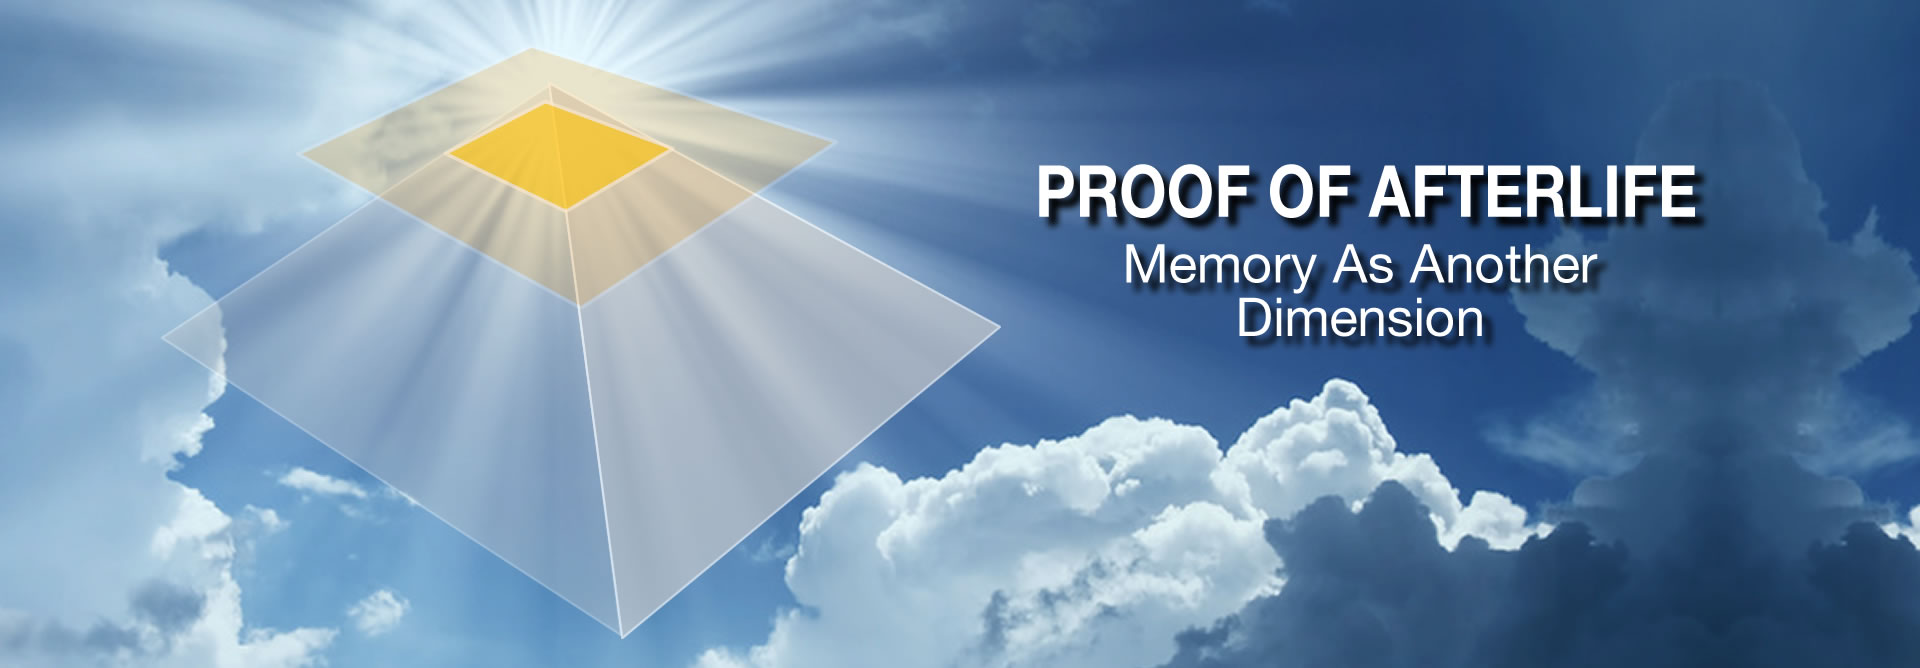 Proof of afterlife heading: memory is another dimension